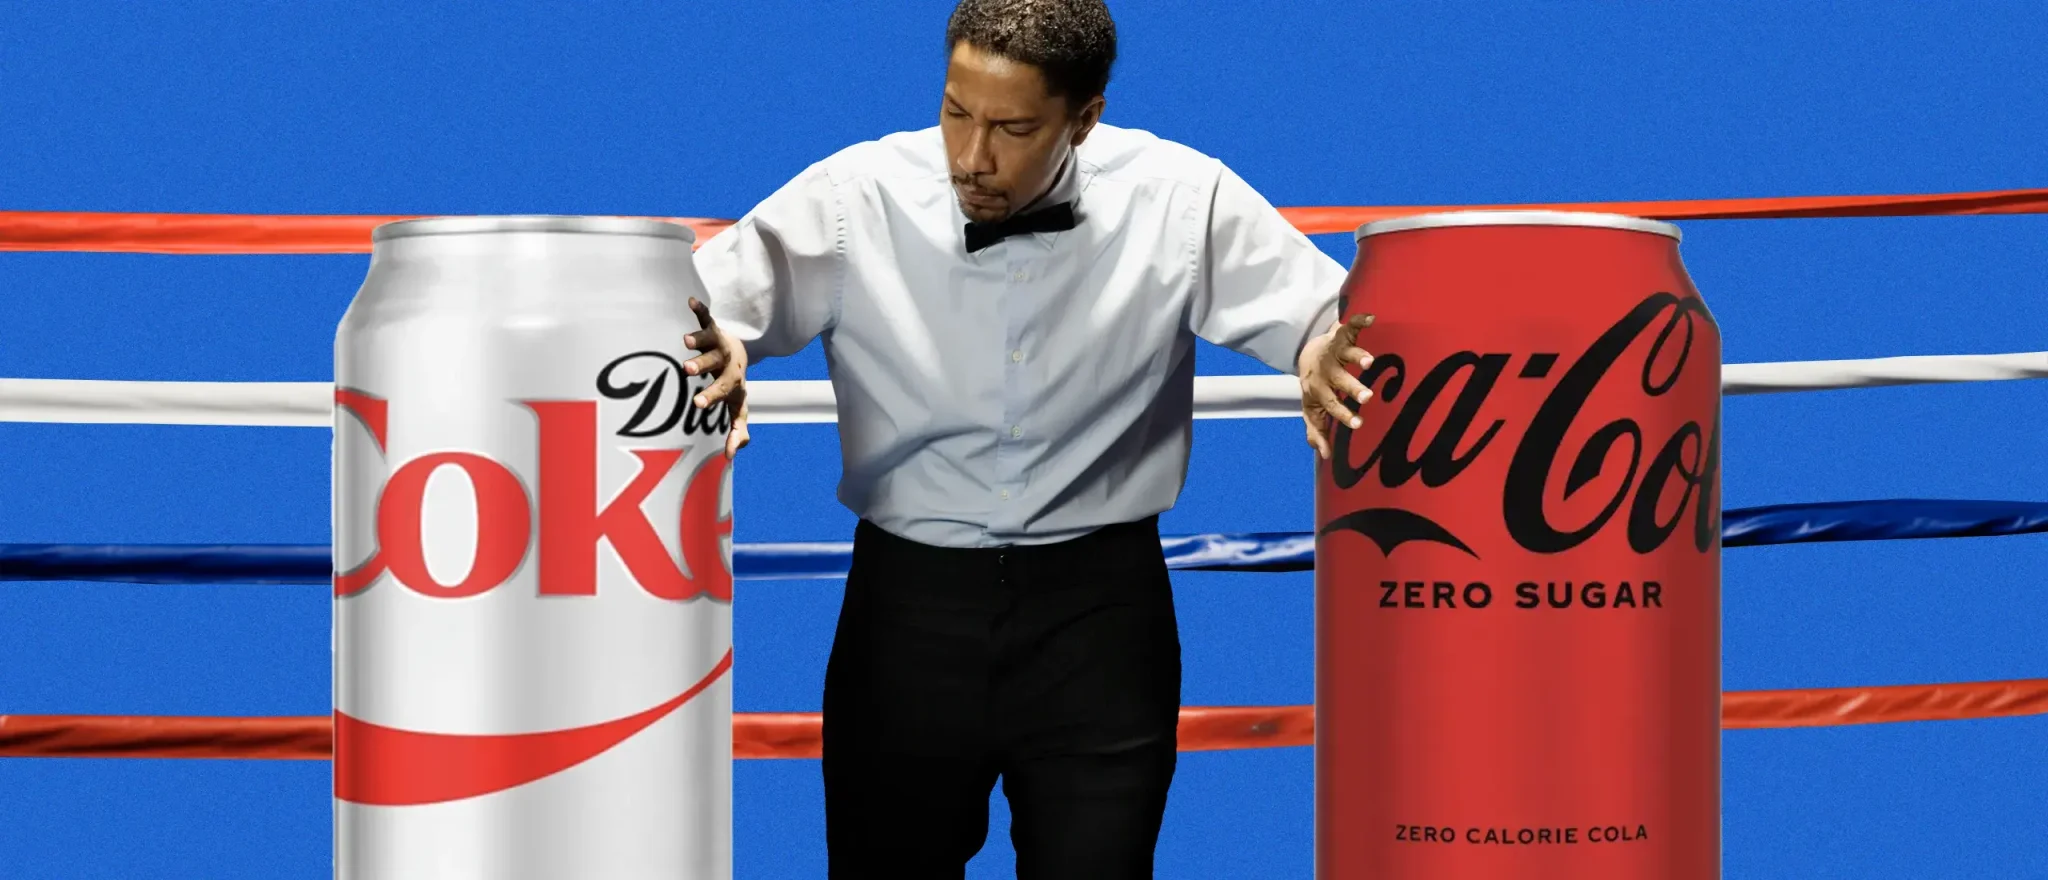 A Dietitian Settles the Coke Zero vs. Diet Coke Debate Once and For All